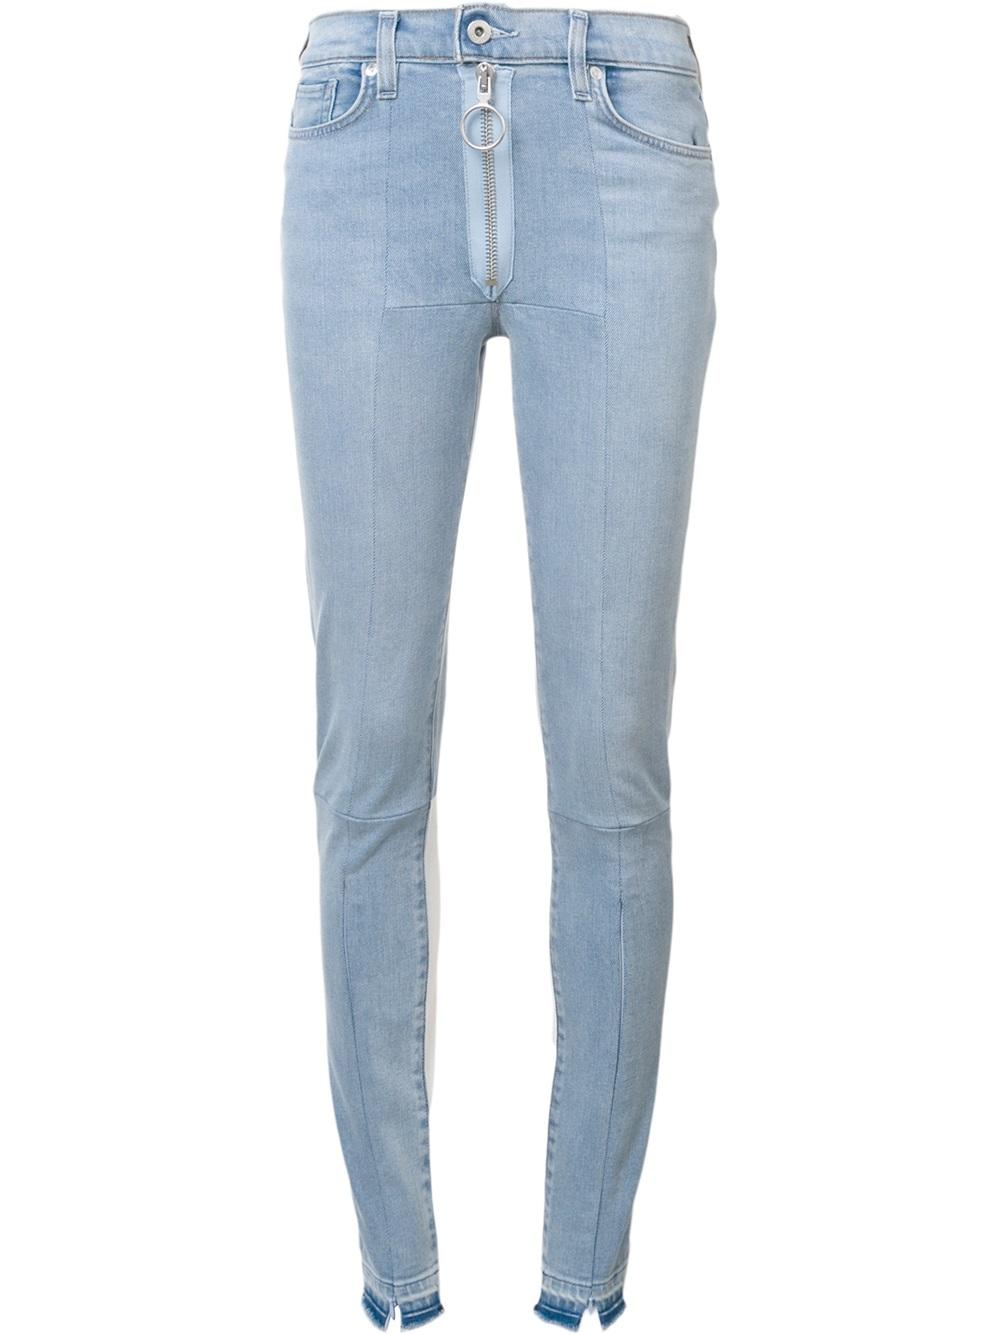 Off-White skinny jeans 7300 VINTAGE WASH Women Clothing